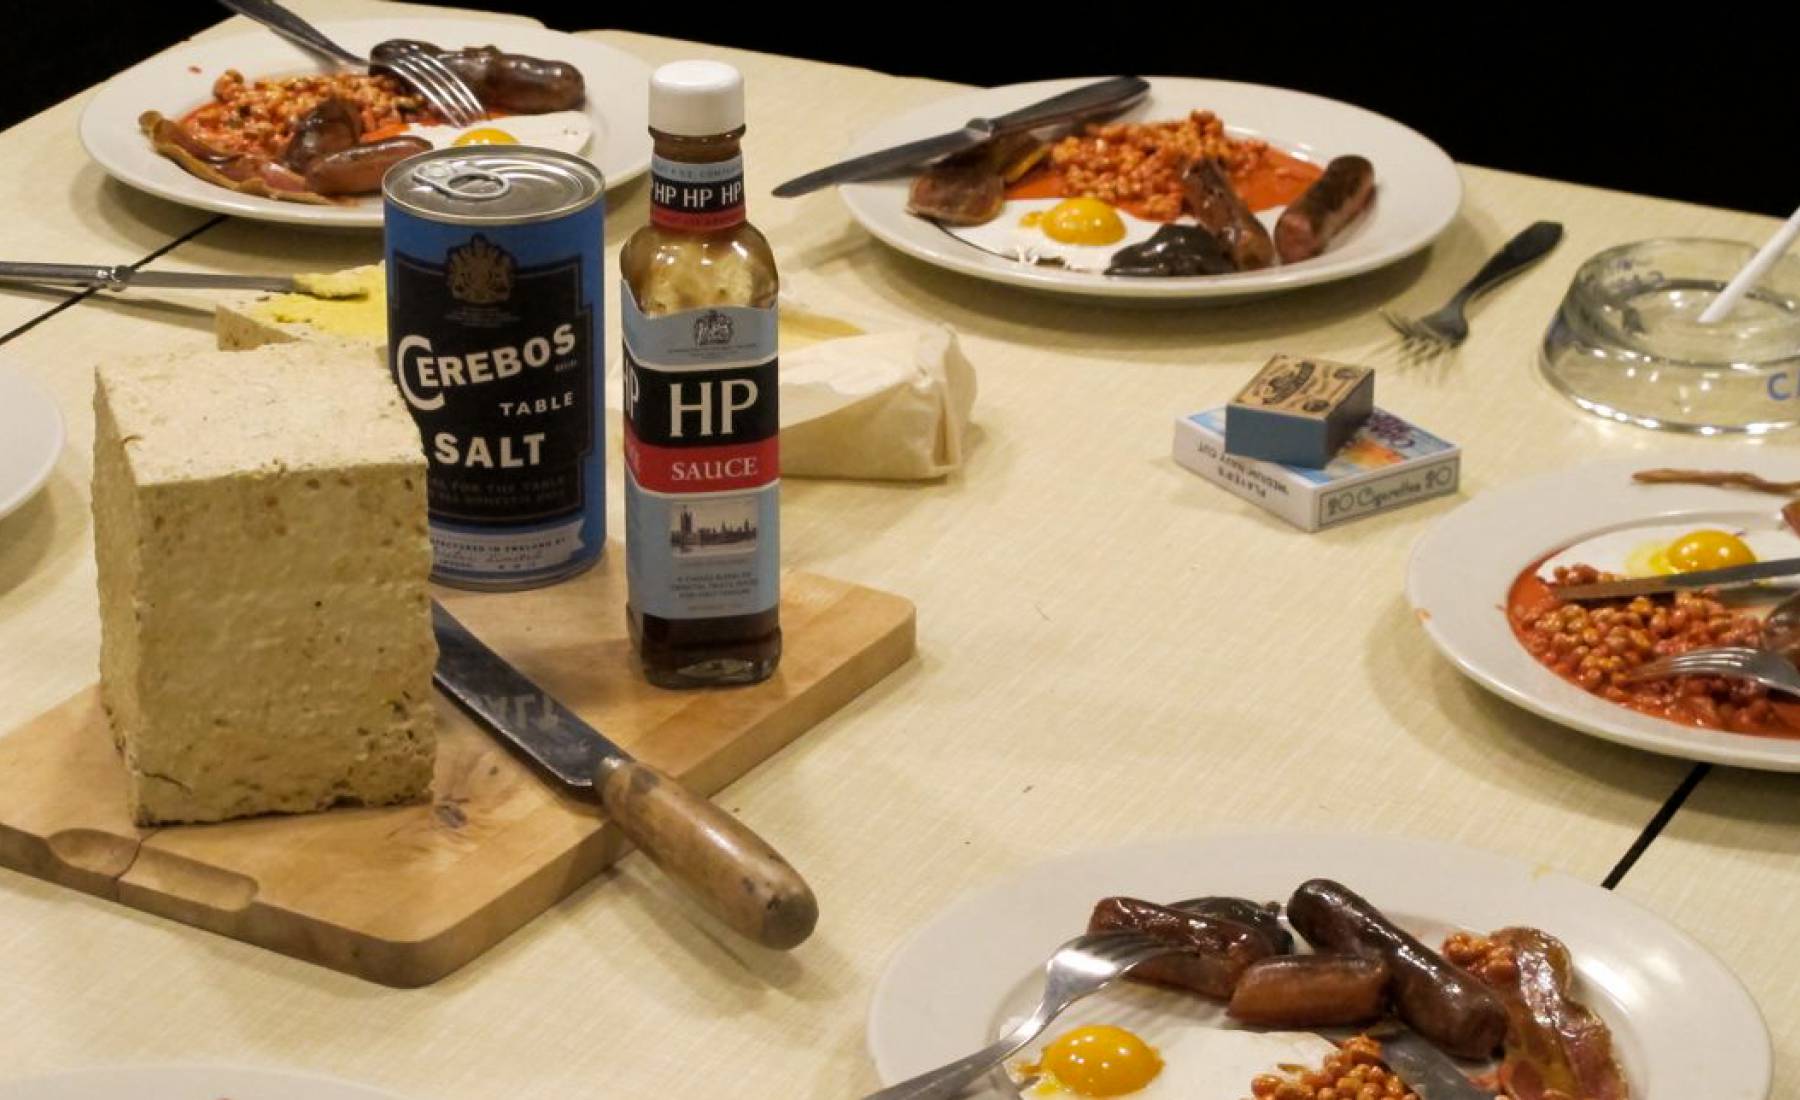 submarine realistic fake food, fried breakfasts on a table.1960's. bread, sausages, eggs, hp sauce, baked beans